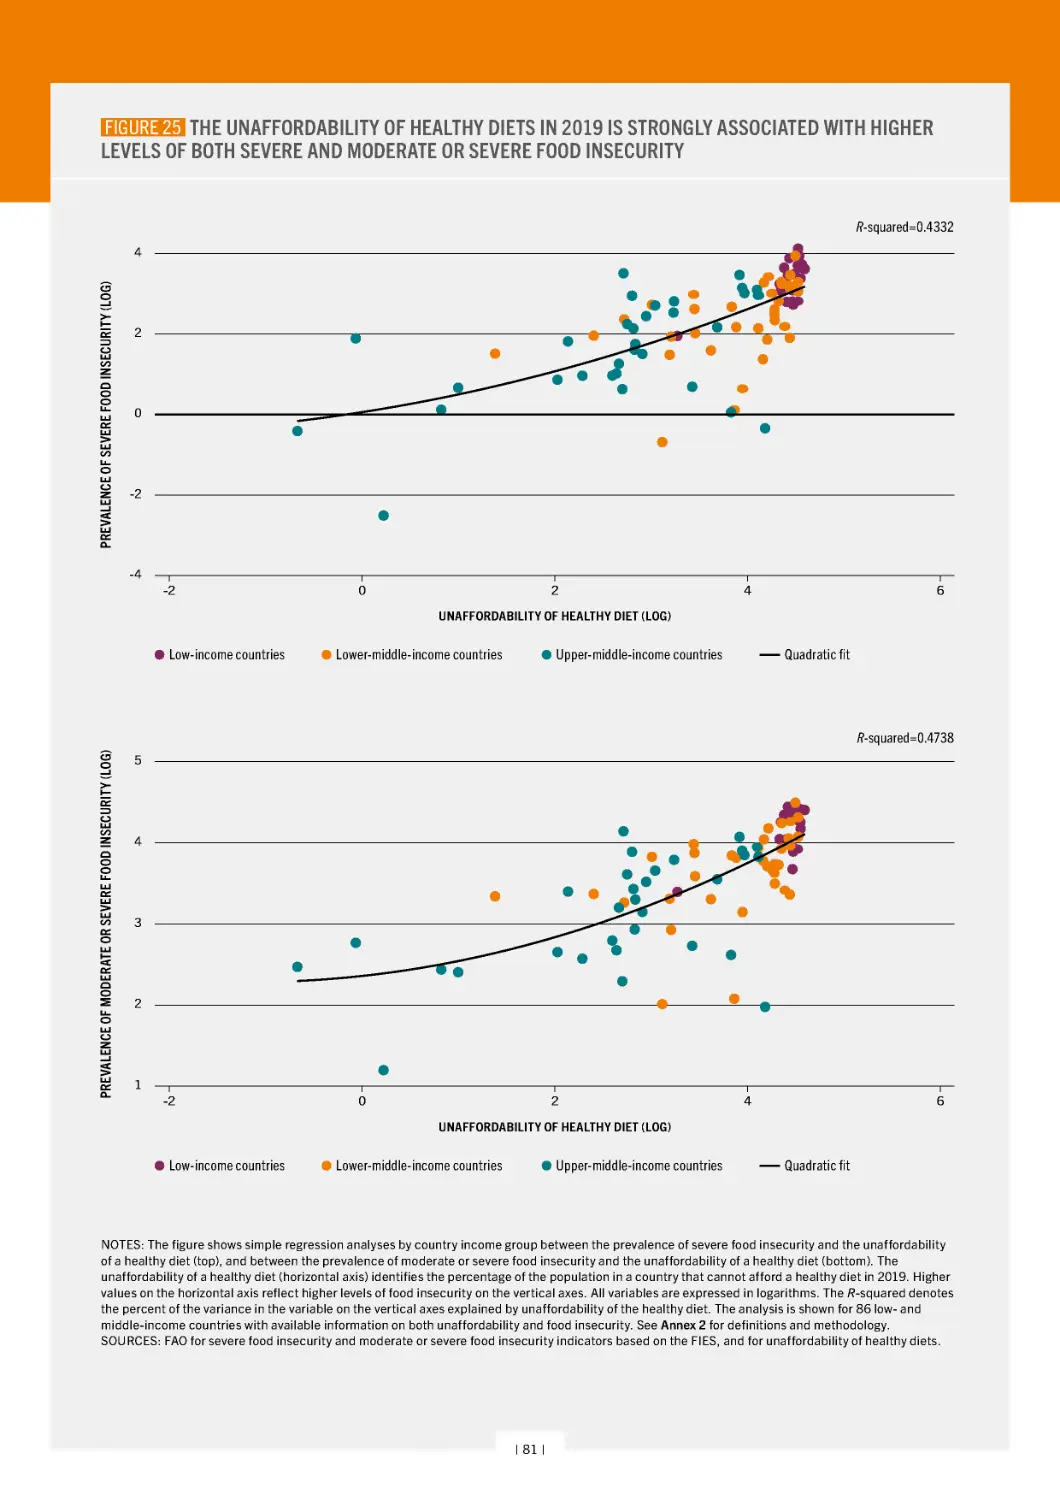 ﻿ figure 25  The unaffordability of healthy diets in 2019 is strongly associated with higher levels of both severe and moderate or severe food insecurit